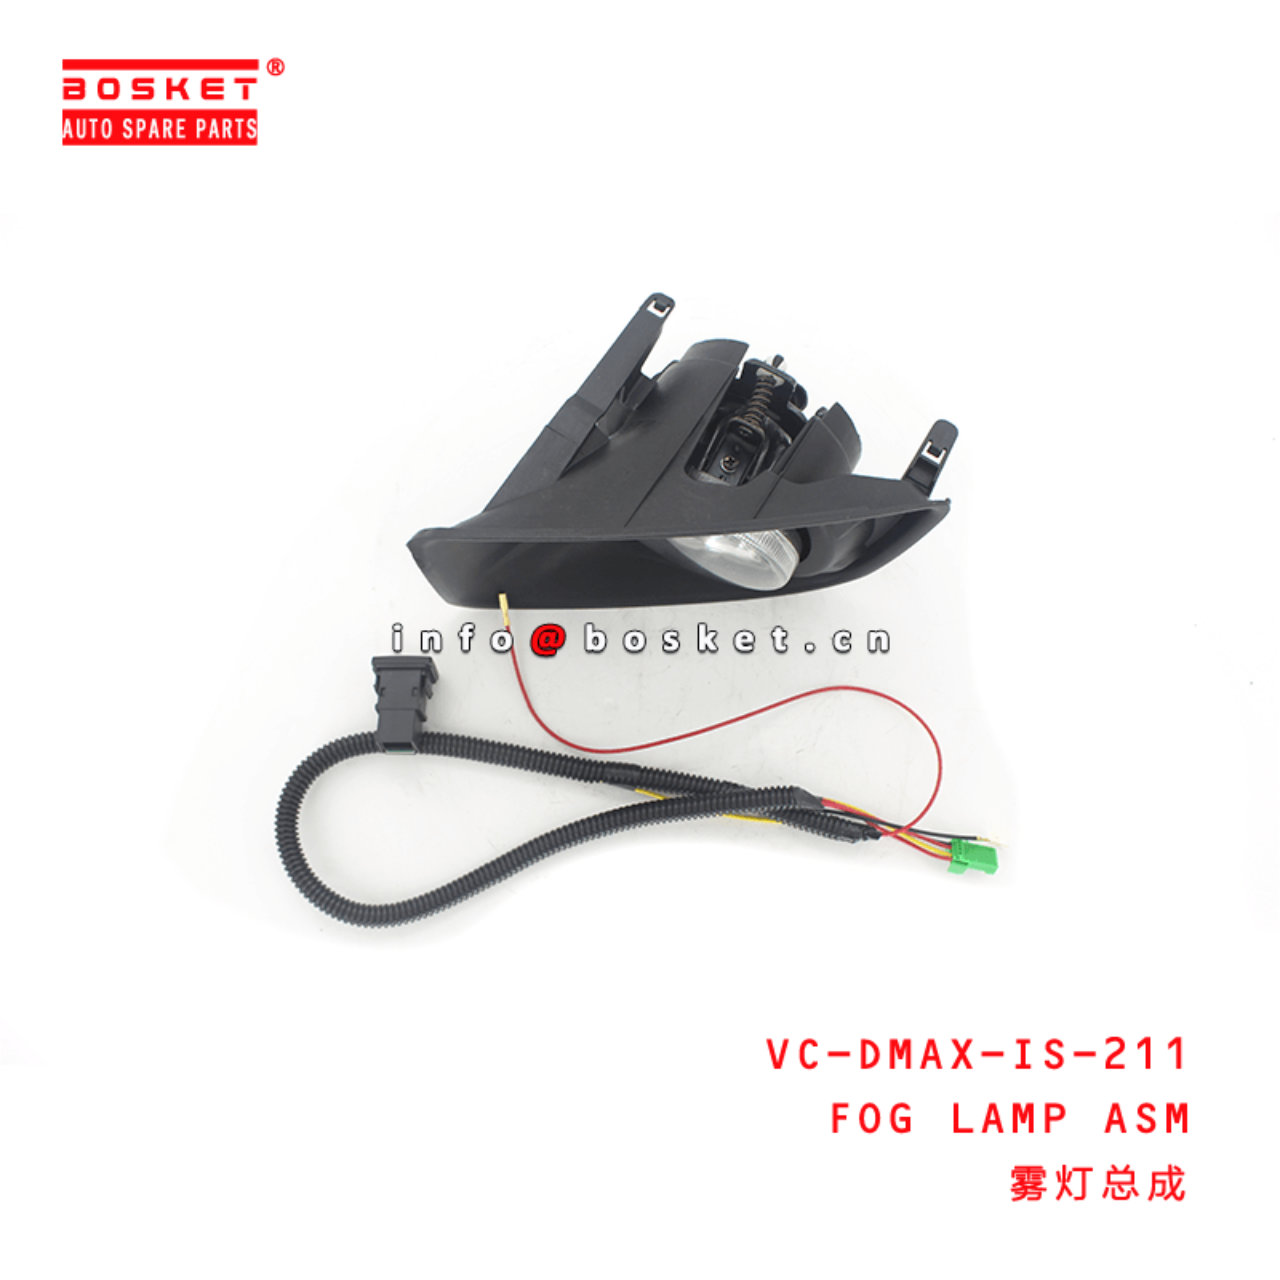 VC-DMAX-IS-211 LH Fog Lamp Assembly Suitable for ISUZU D-MAX 2013-2015